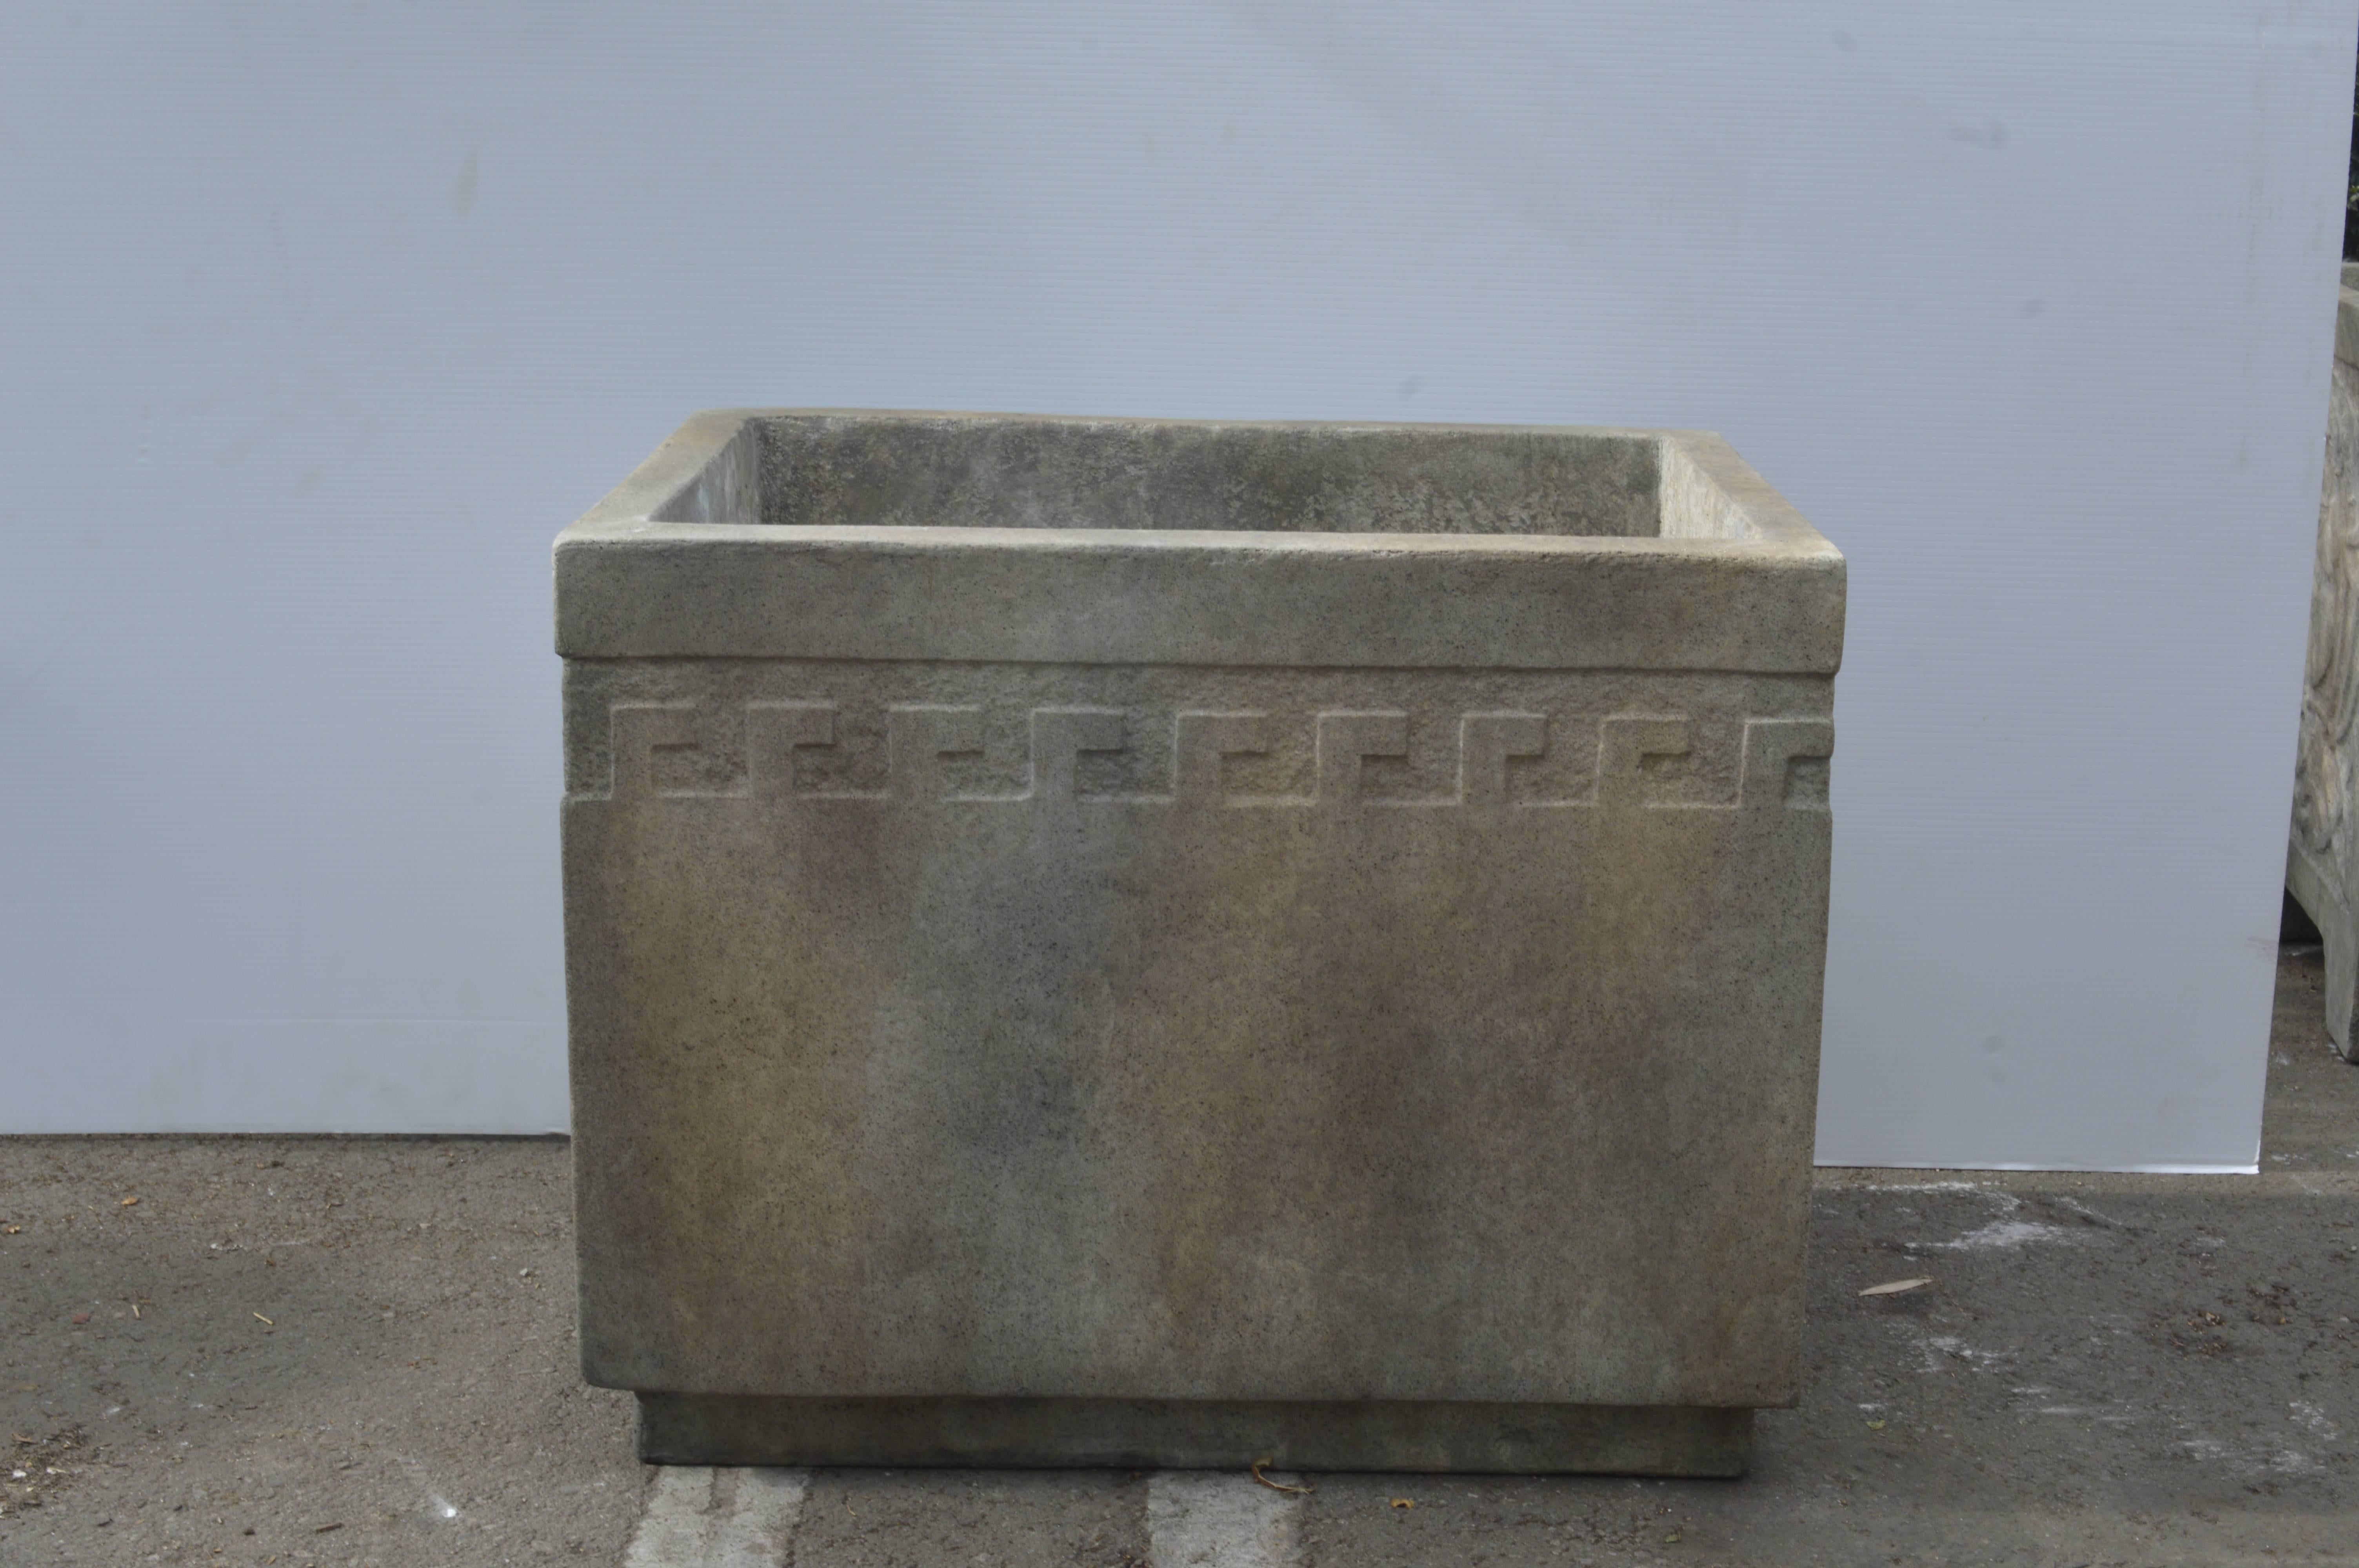 Beautifully designed Greek key rectangular planter.
7-8 week lead time for production if not in stock.